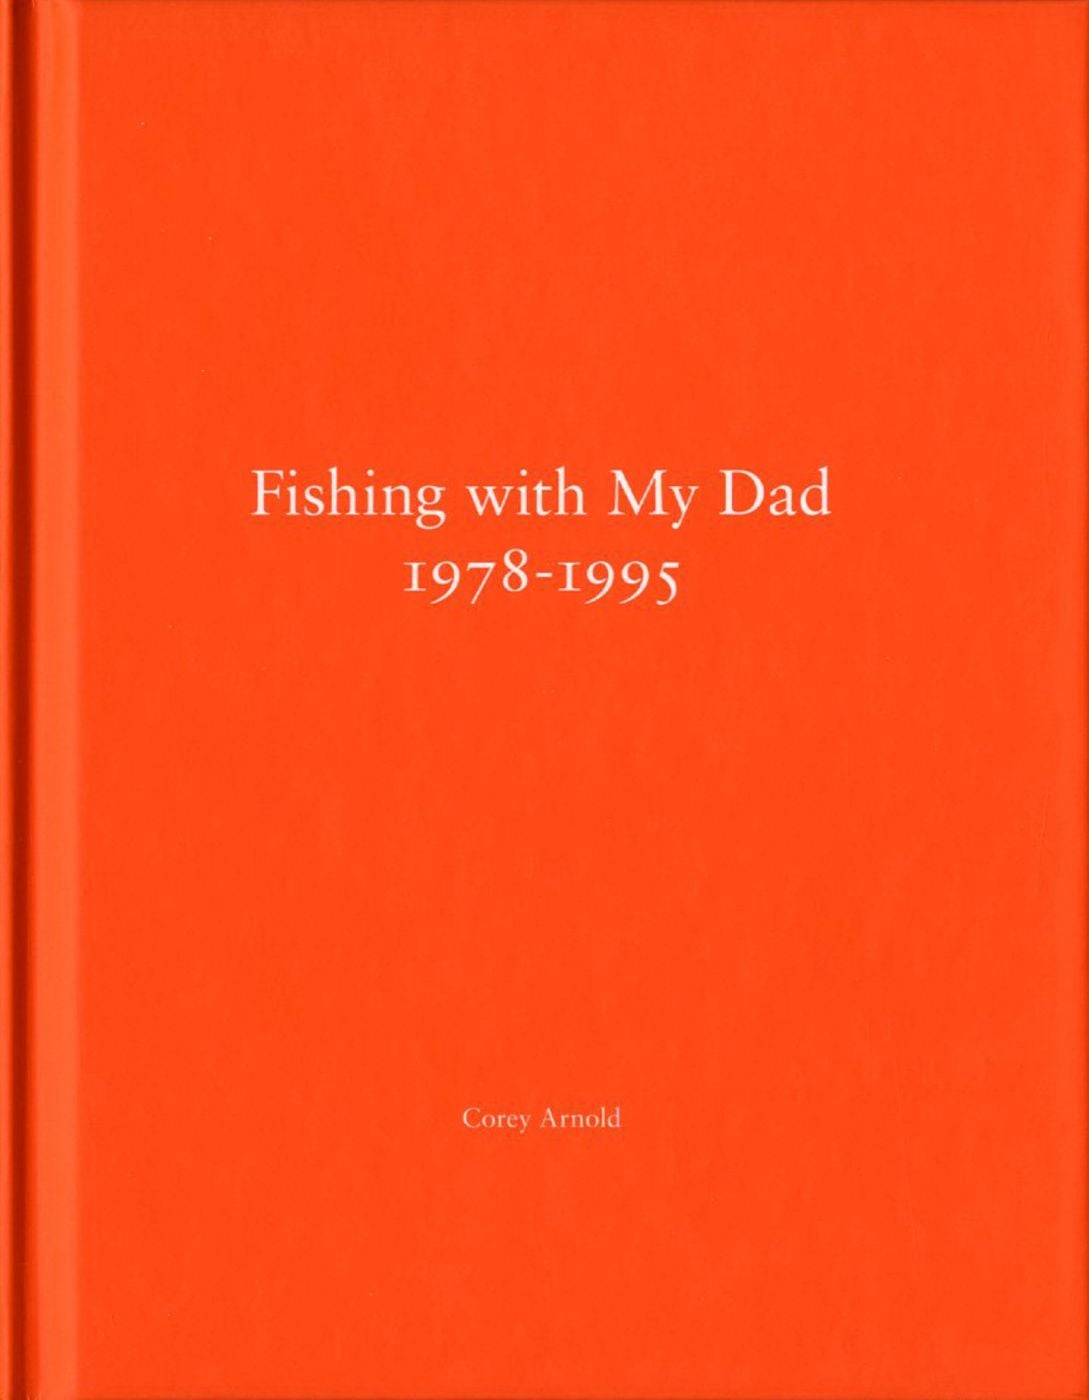 Corey Arnold and Chris Arnold: Fishing with My Dad 1978-1995 (One Picture Book #69), Limited Edition (with Print)